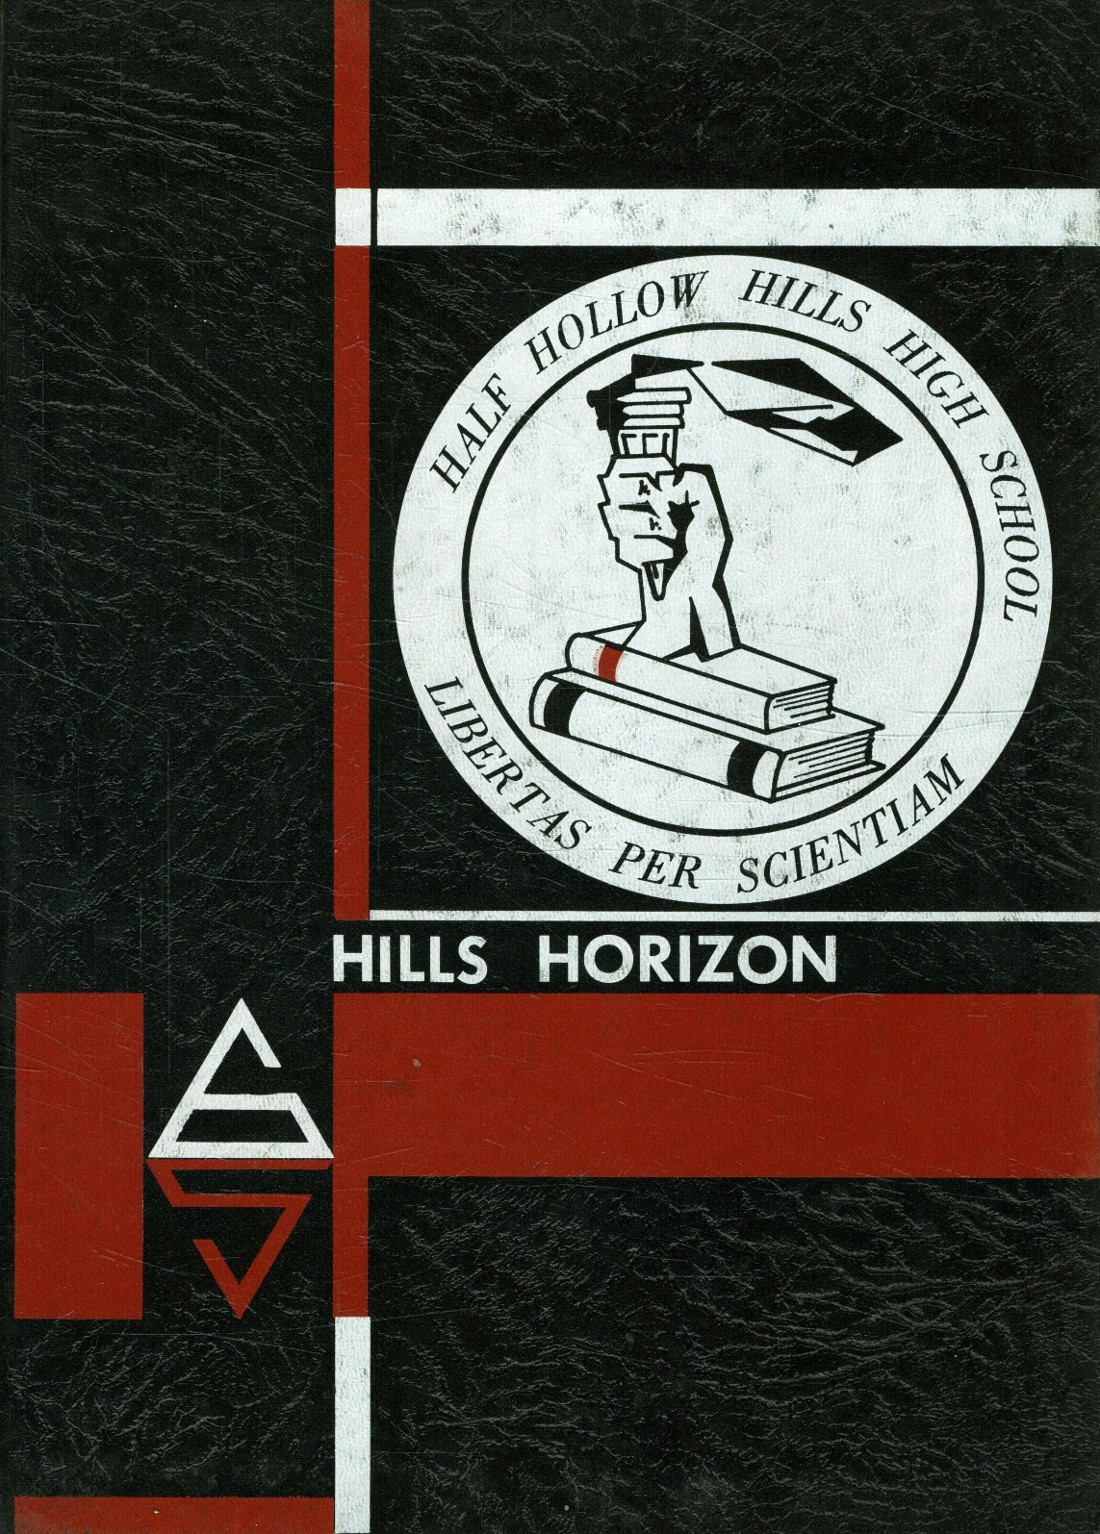 1965 yearbook from Half Hollow Hills High School East from Dix hills